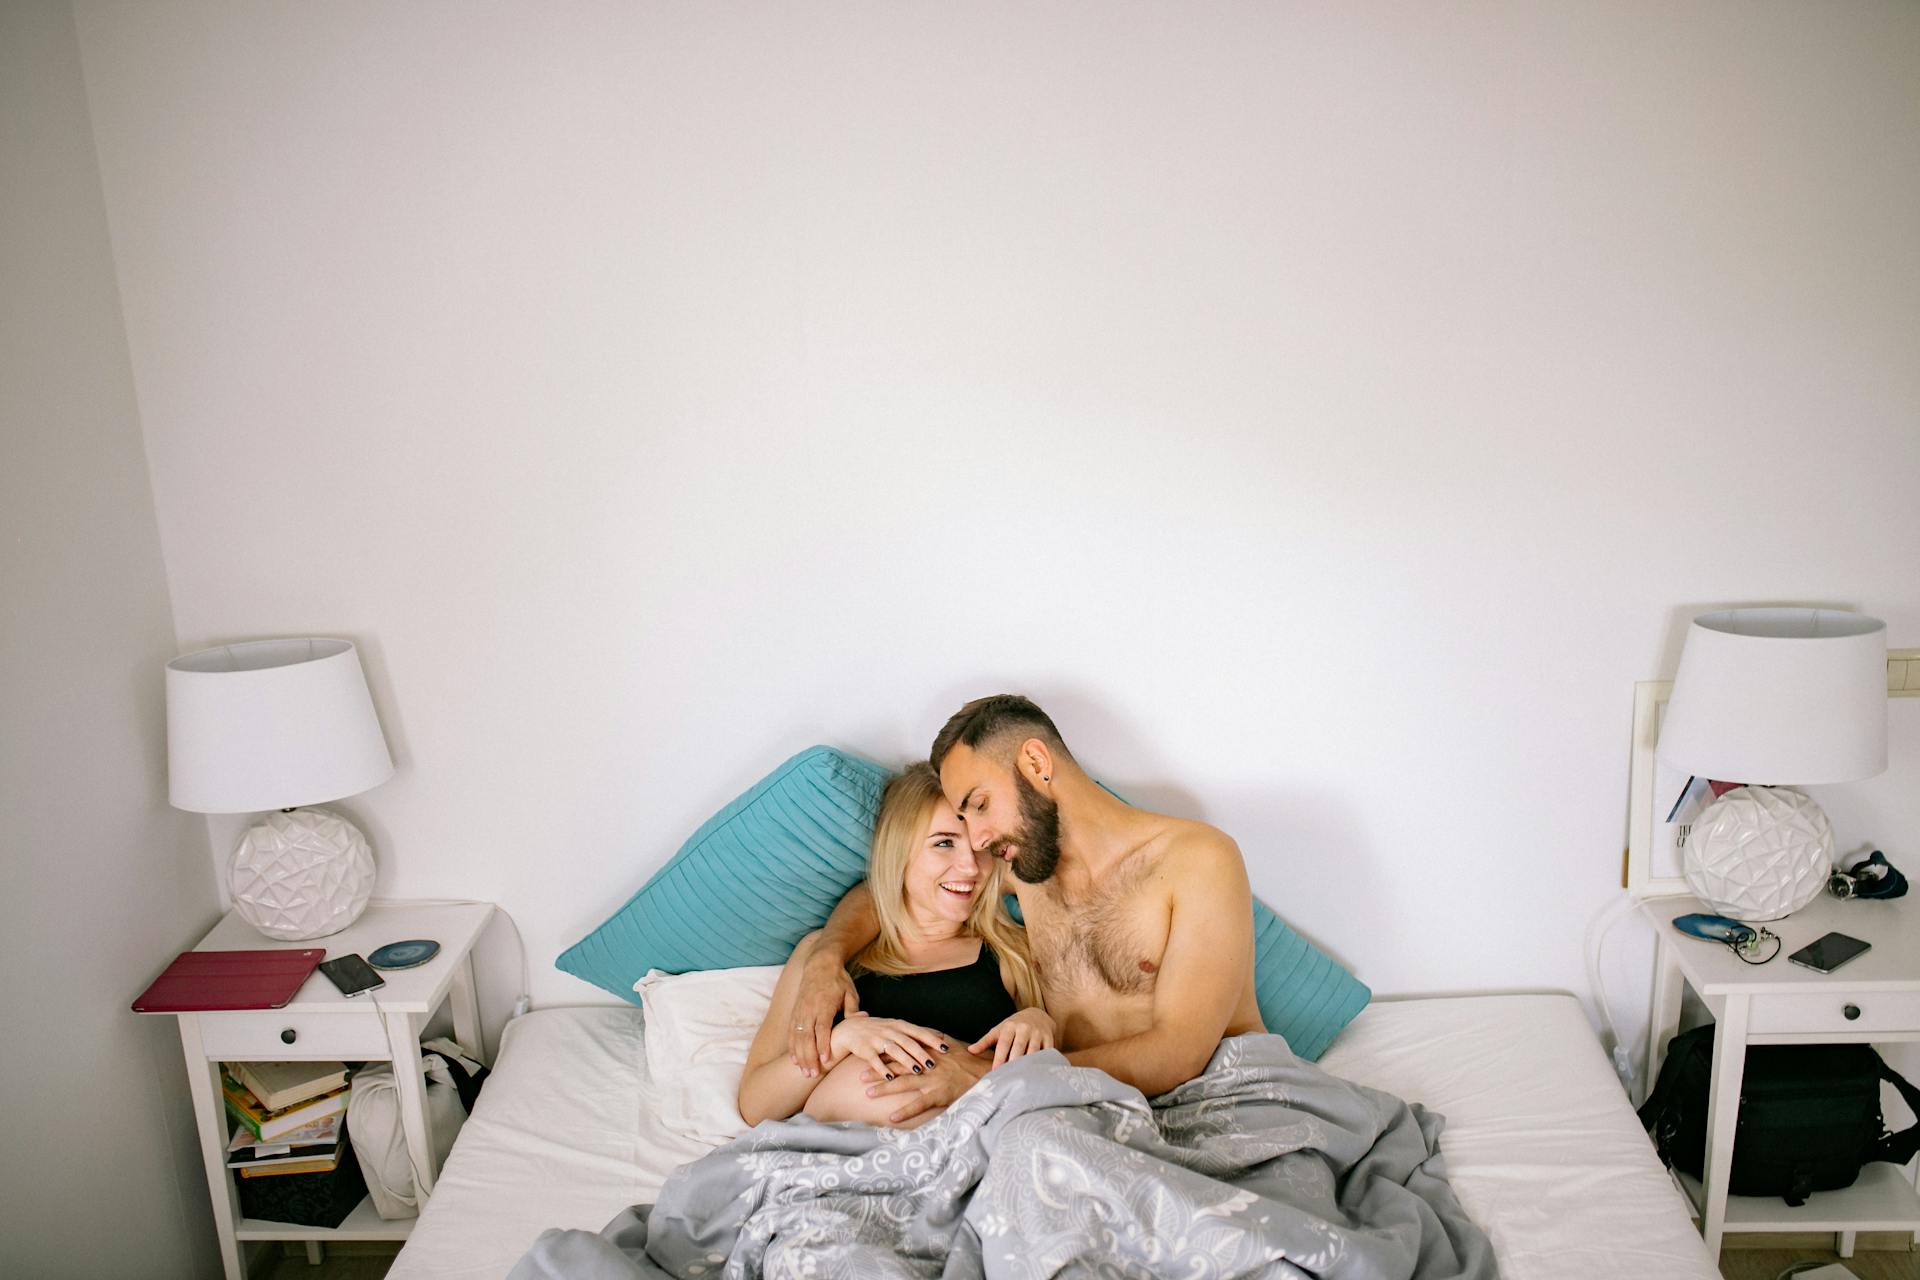 A husband touching his pregnant wife's baby bump while cuddling in bed | Source: Pexels